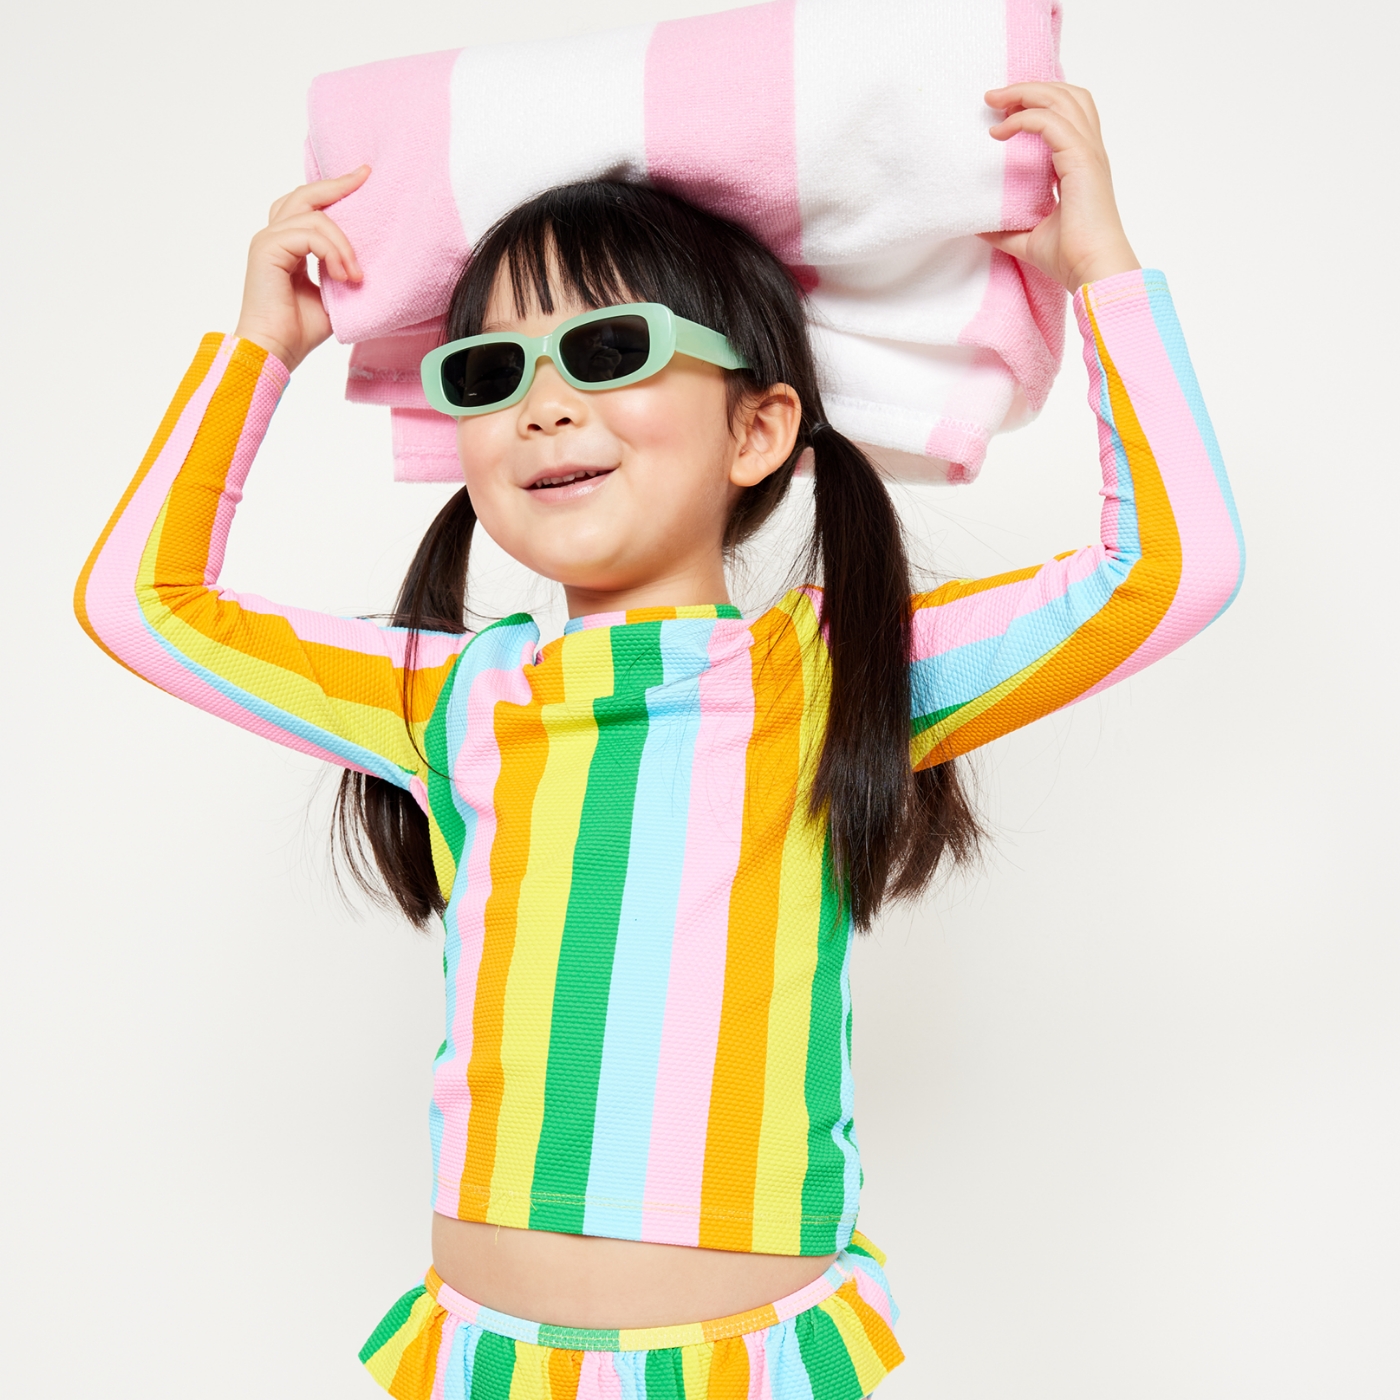 A toddler girl dressed in a matching rainbow stripe bathing suit.